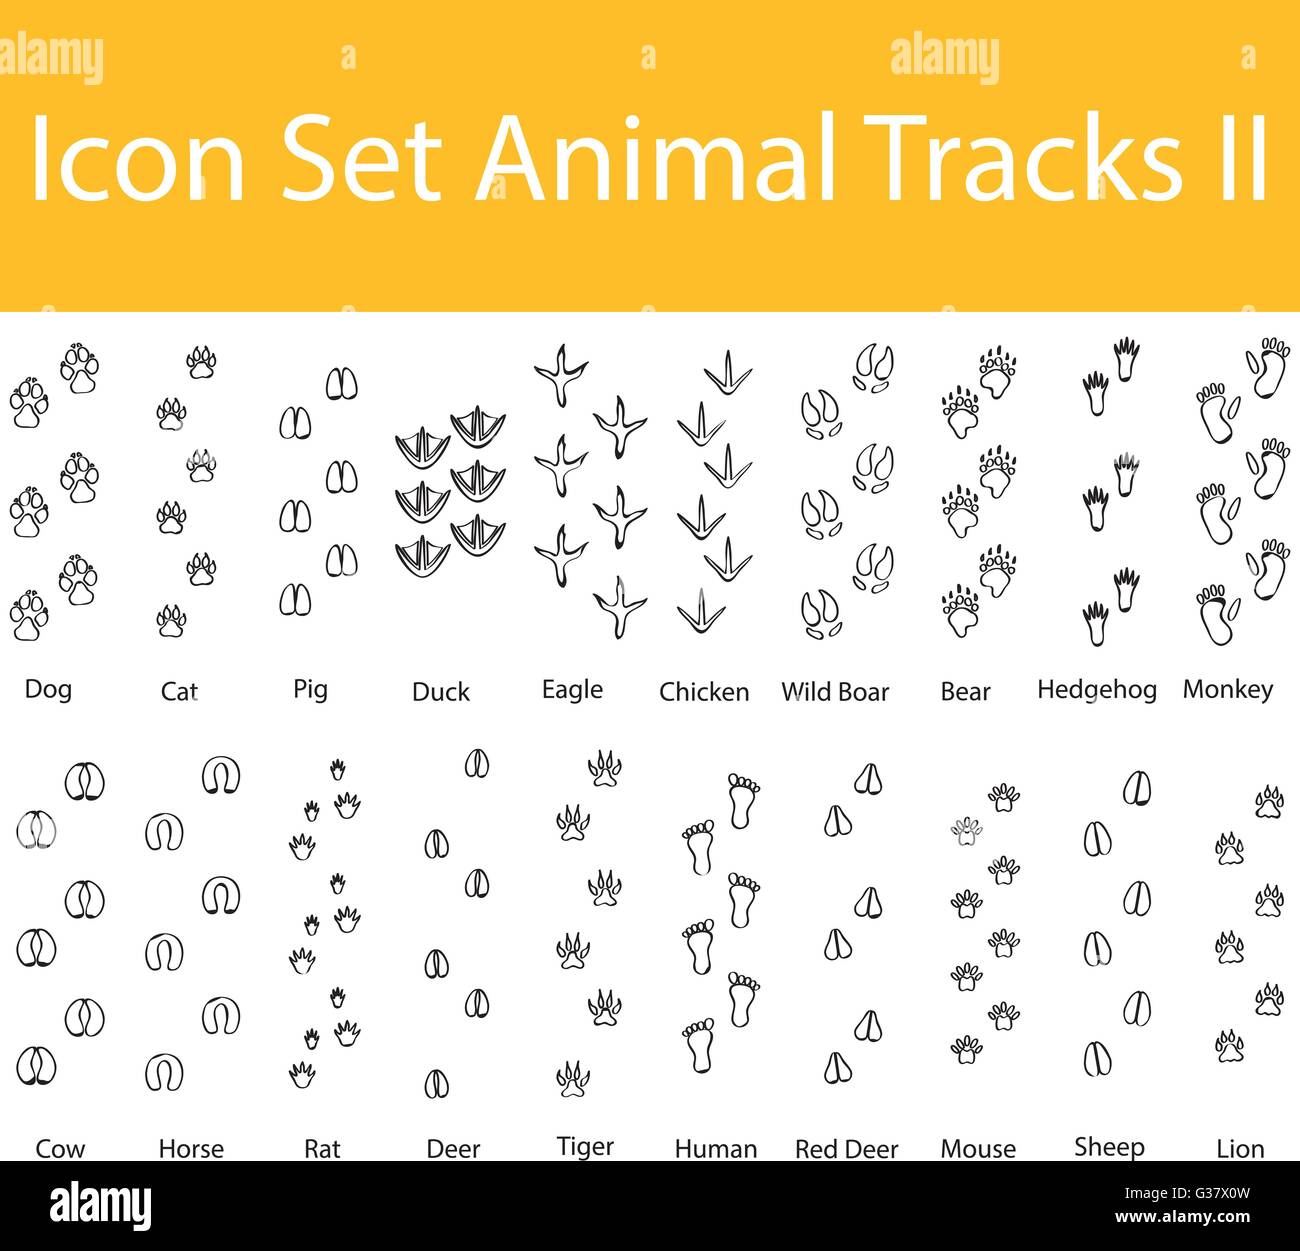 Drawn Doodle Lined Icon Set Animal Tracks II with 20 icons for the creative use in graphic design Stock Vector